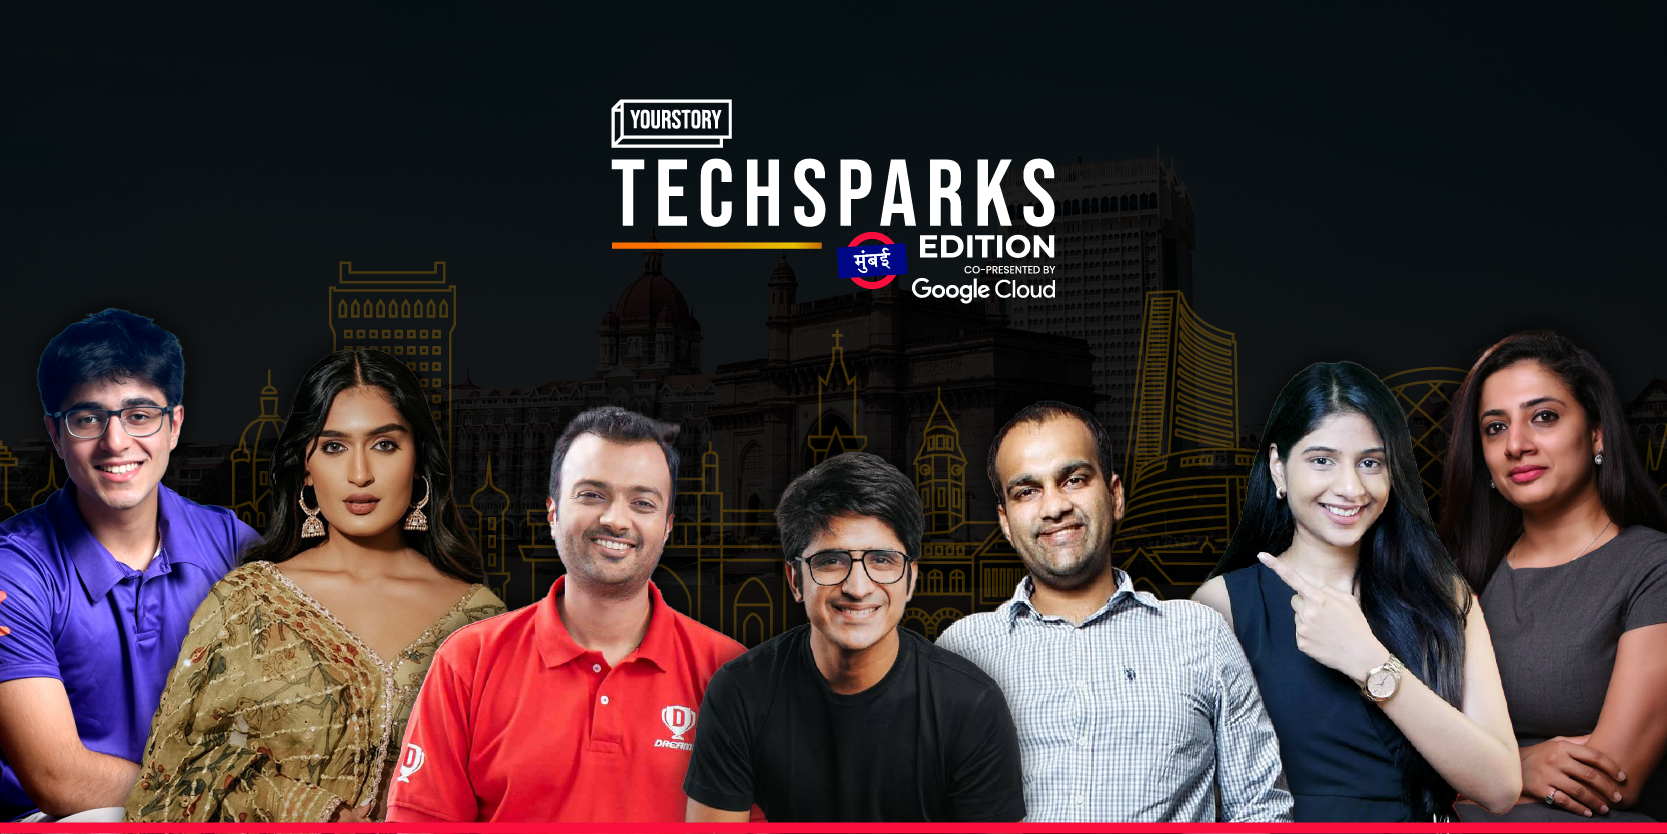 [TechSparks Mumbai] 7 reasons to attend the premier edition of India’s most influential startup-tech event in Mumbai